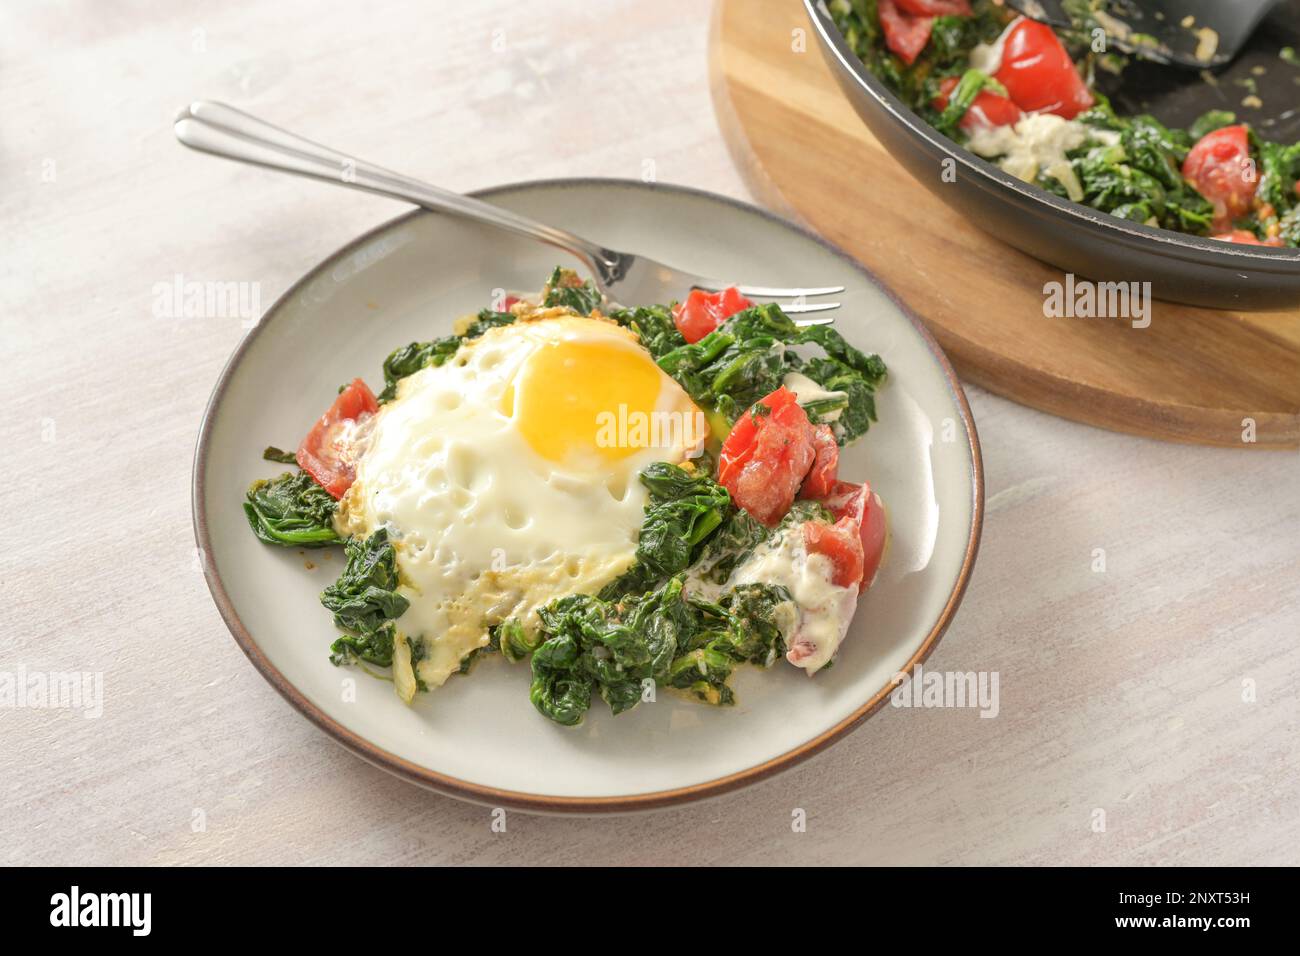 Fried egg on spinach with tomatoes and cheese served on a plate on a light painted wooden table, homemade healthy dish, copy space, selected focus, na Stock Photo